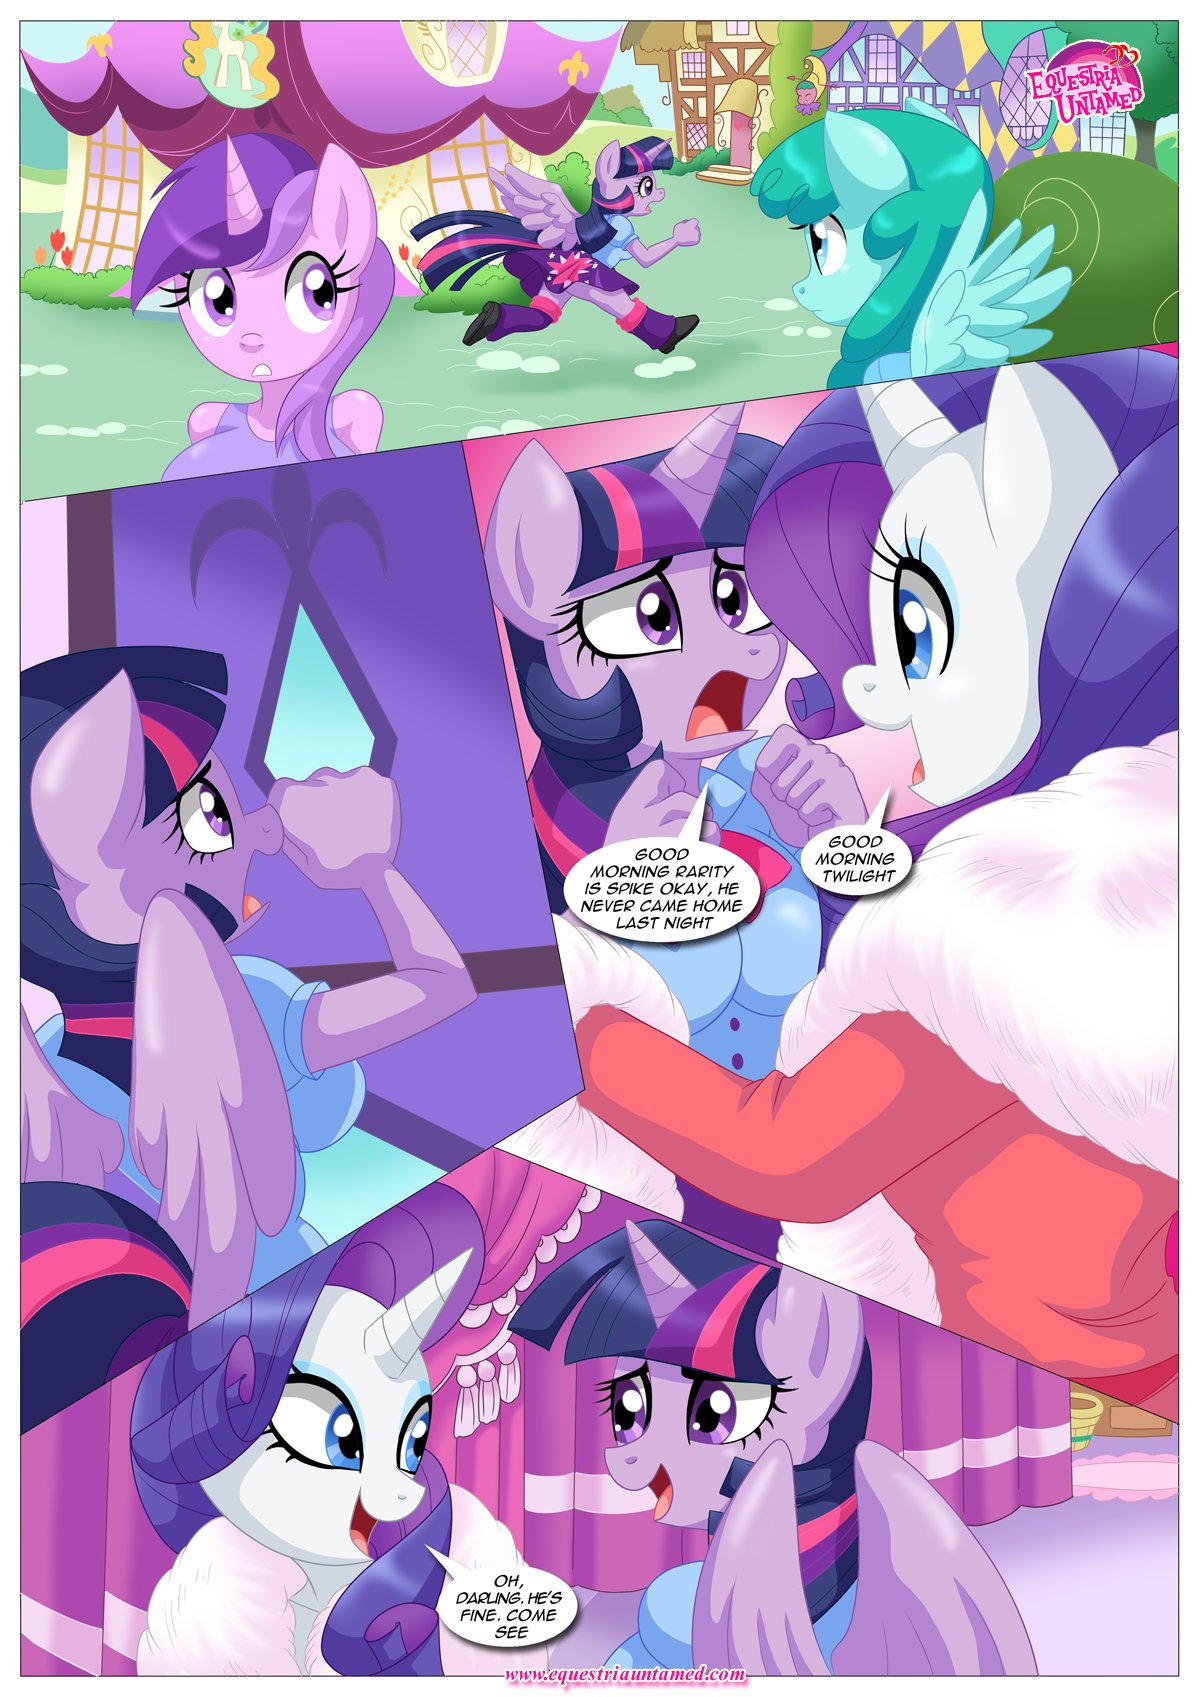 bbmbbf comic equestria_untamed friendship_is_magic my_little_pony palcomix rainbow_dash's_game_of_extreme_pda rarity rarity_(mlp) text twilight_sparkle twilight_sparkle_(mlp)